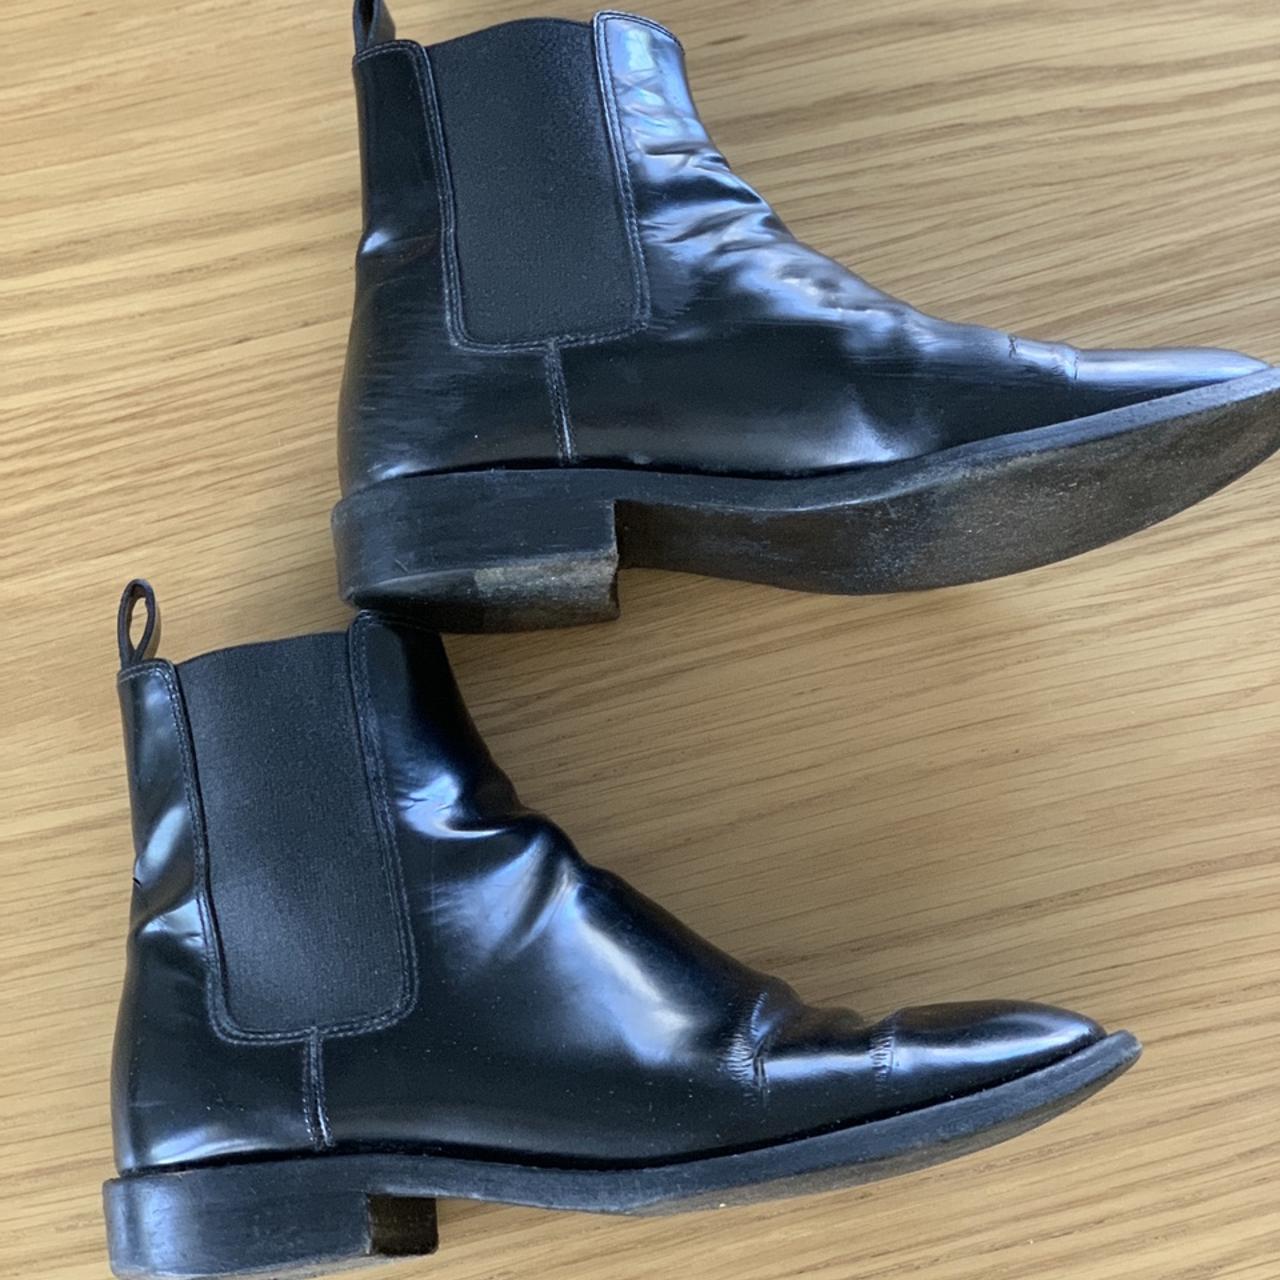 SAINT LAURENT LEATHER CHELSEA BOOTS MADE IN... - Depop